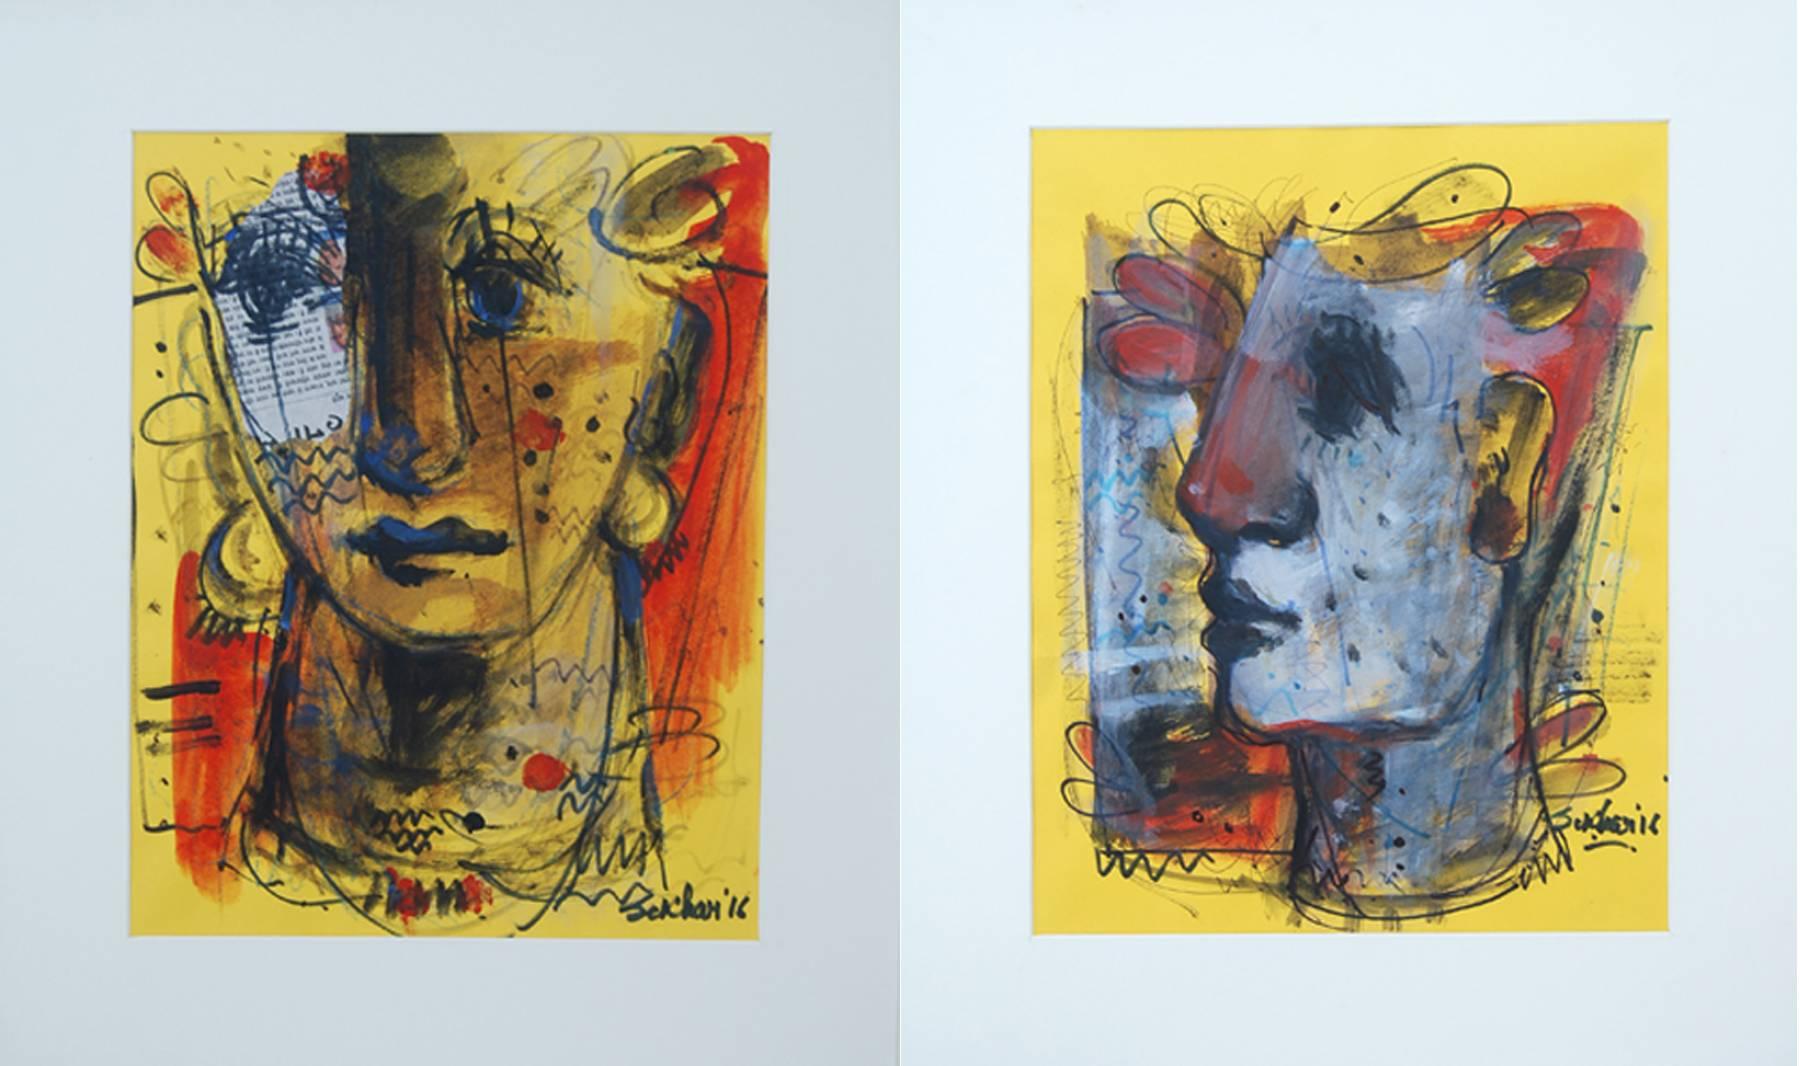 Sekhar Kar Portrait Painting - Man & Woman, Faces, Mixed Media, Red, Blue, Brown by Indian Artist "In Stock"